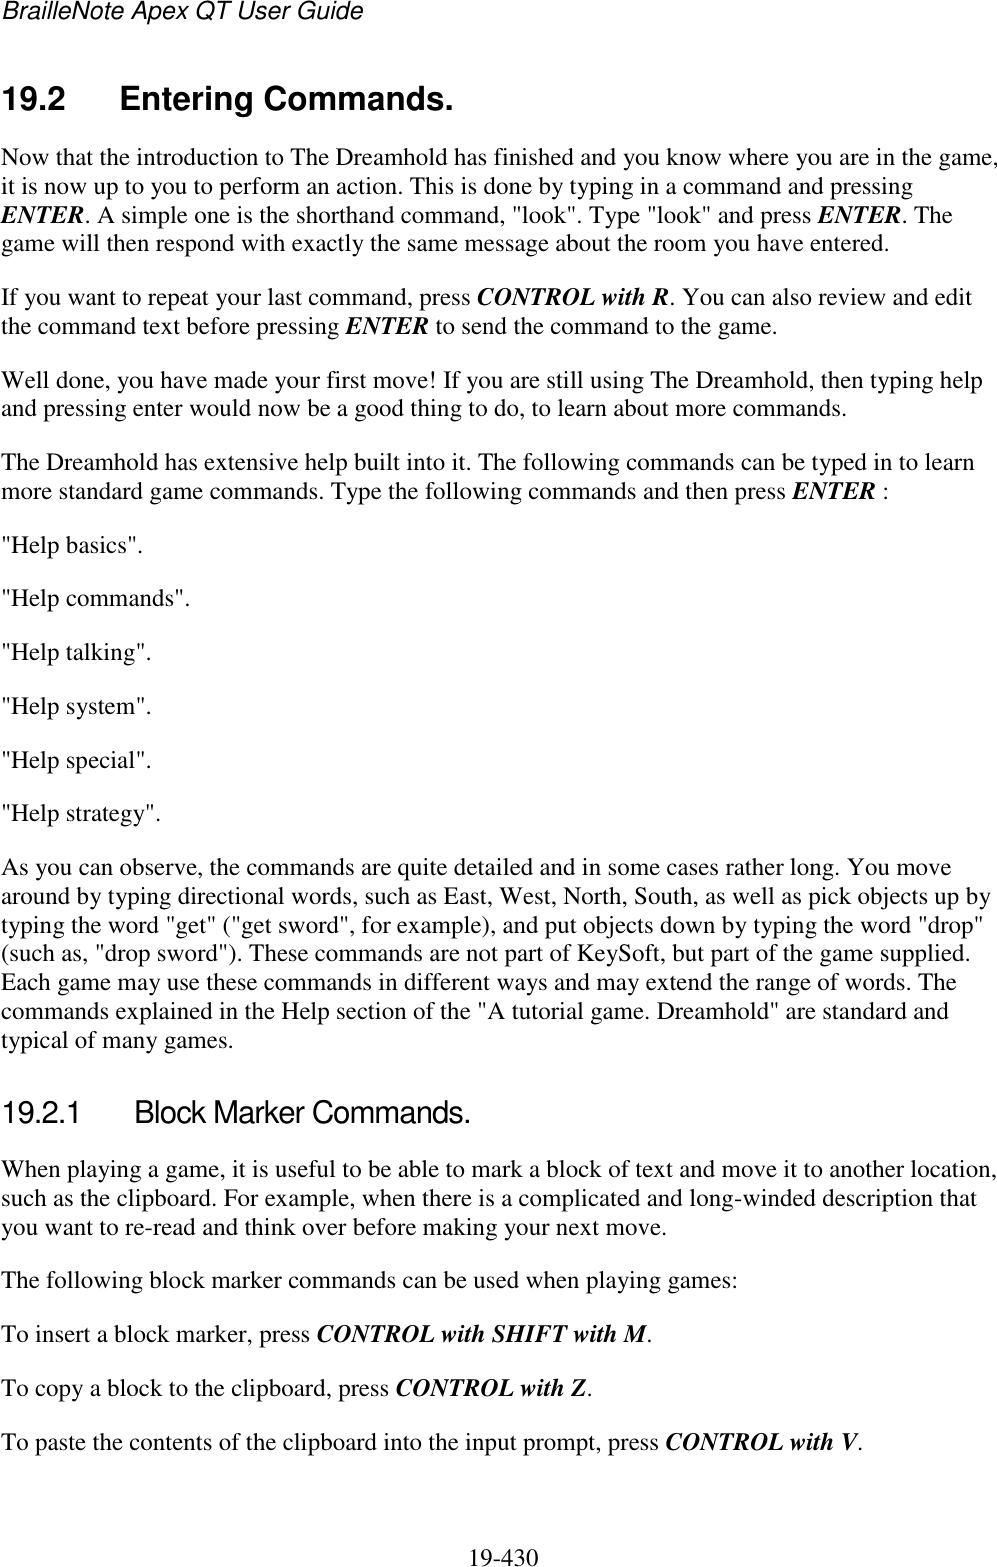 BrailleNote Apex QT User Guide  19-430   19.2  Entering Commands. Now that the introduction to The Dreamhold has finished and you know where you are in the game, it is now up to you to perform an action. This is done by typing in a command and pressing ENTER. A simple one is the shorthand command, &quot;look&quot;. Type &quot;look&quot; and press ENTER. The game will then respond with exactly the same message about the room you have entered. If you want to repeat your last command, press CONTROL with R. You can also review and edit the command text before pressing ENTER to send the command to the game. Well done, you have made your first move! If you are still using The Dreamhold, then typing help and pressing enter would now be a good thing to do, to learn about more commands.  The Dreamhold has extensive help built into it. The following commands can be typed in to learn more standard game commands. Type the following commands and then press ENTER : &quot;Help basics&quot;. &quot;Help commands&quot;. &quot;Help talking&quot;. &quot;Help system&quot;. &quot;Help special&quot;. &quot;Help strategy&quot;. As you can observe, the commands are quite detailed and in some cases rather long. You move around by typing directional words, such as East, West, North, South, as well as pick objects up by typing the word &quot;get&quot; (&quot;get sword&quot;, for example), and put objects down by typing the word &quot;drop&quot; (such as, &quot;drop sword&quot;). These commands are not part of KeySoft, but part of the game supplied. Each game may use these commands in different ways and may extend the range of words. The commands explained in the Help section of the &quot;A tutorial game. Dreamhold&quot; are standard and typical of many games.  19.2.1  Block Marker Commands. When playing a game, it is useful to be able to mark a block of text and move it to another location, such as the clipboard. For example, when there is a complicated and long-winded description that you want to re-read and think over before making your next move. The following block marker commands can be used when playing games: To insert a block marker, press CONTROL with SHIFT with M. To copy a block to the clipboard, press CONTROL with Z. To paste the contents of the clipboard into the input prompt, press CONTROL with V.   